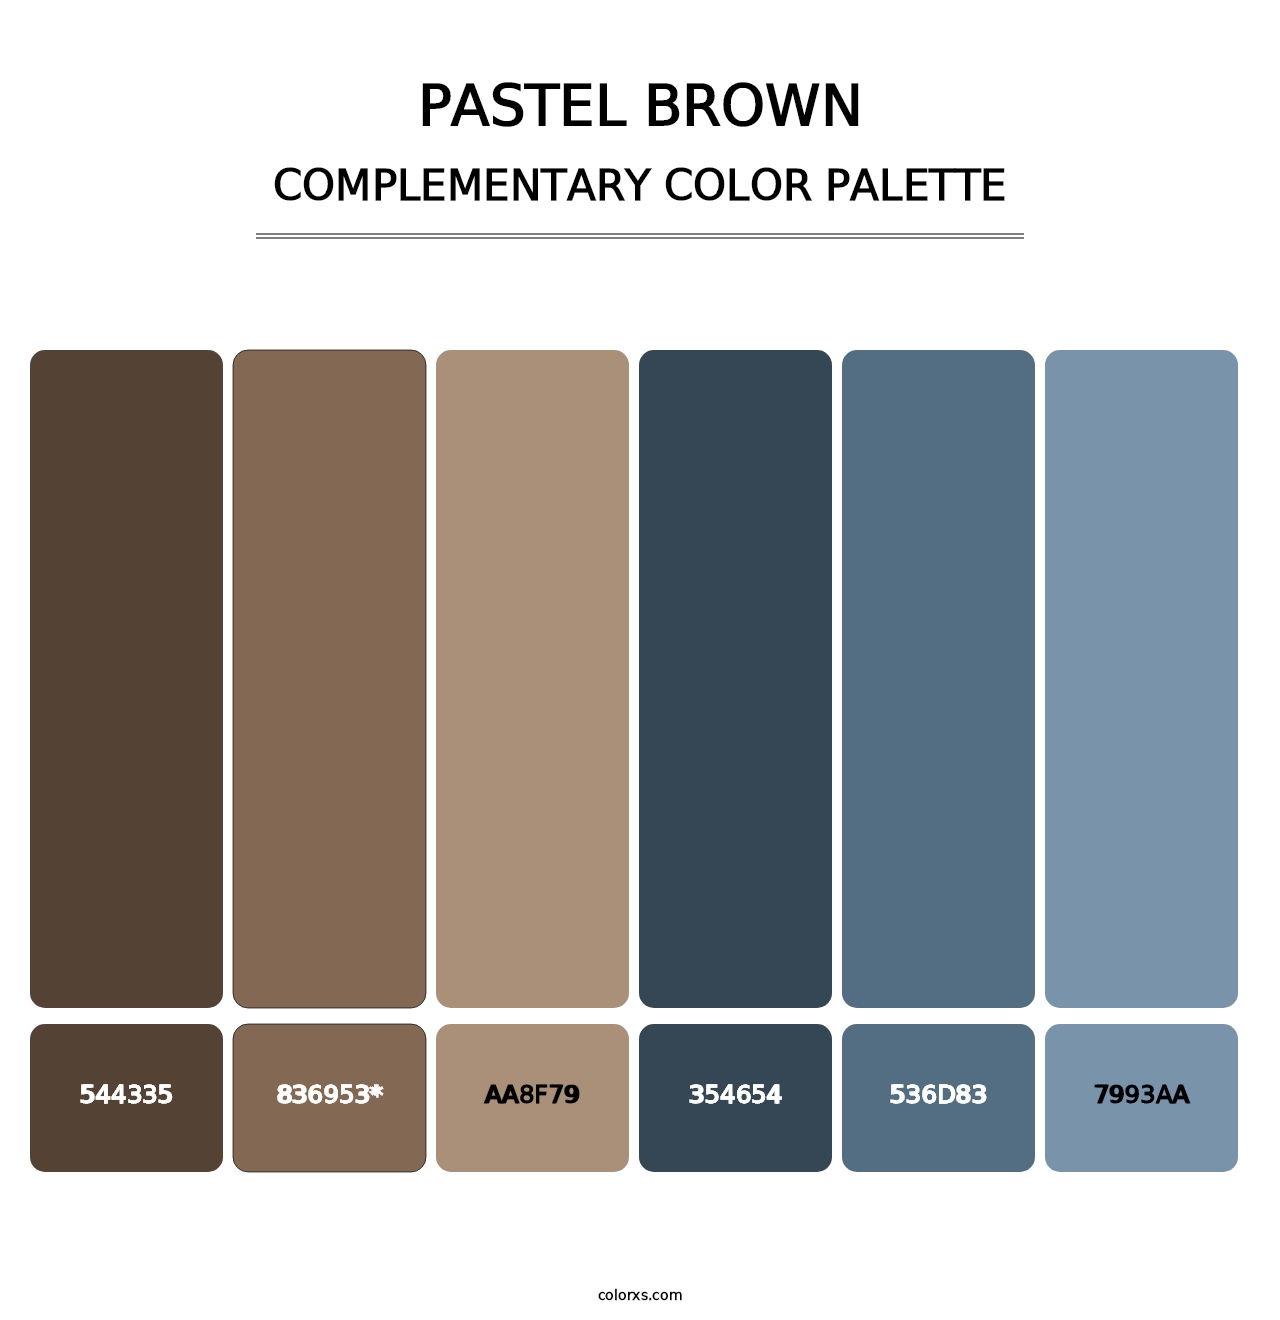 Pastel Brown - Complementary Color Palette